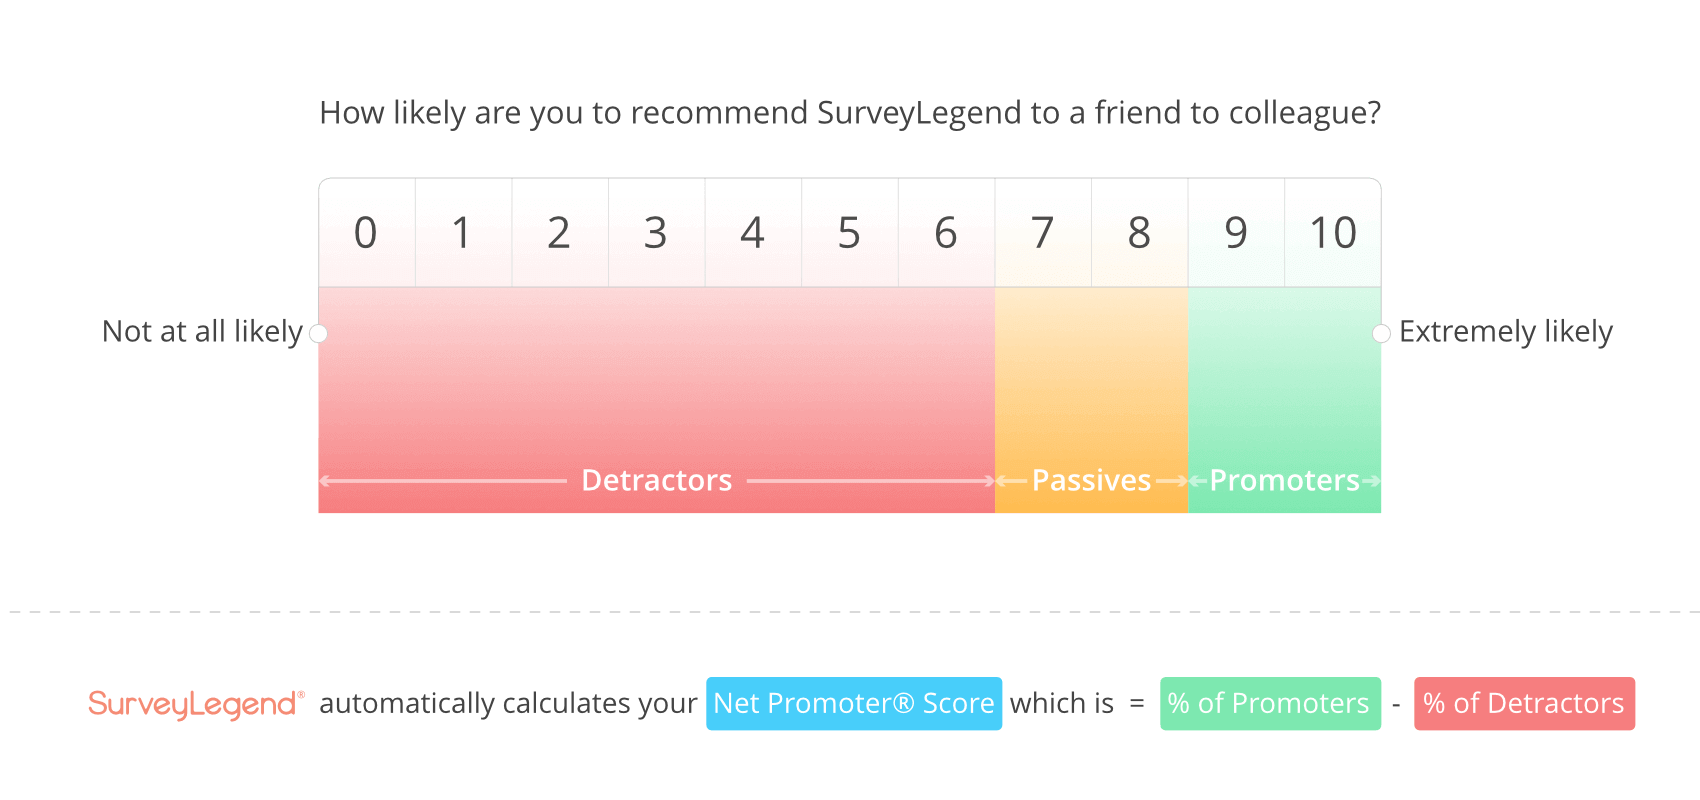 SurveyLegend automatically calculates your Net Promoter Score, which is the percentage of Promoters, minus the percentage of Detractors. This is shown in real-time in your Live Analytics.